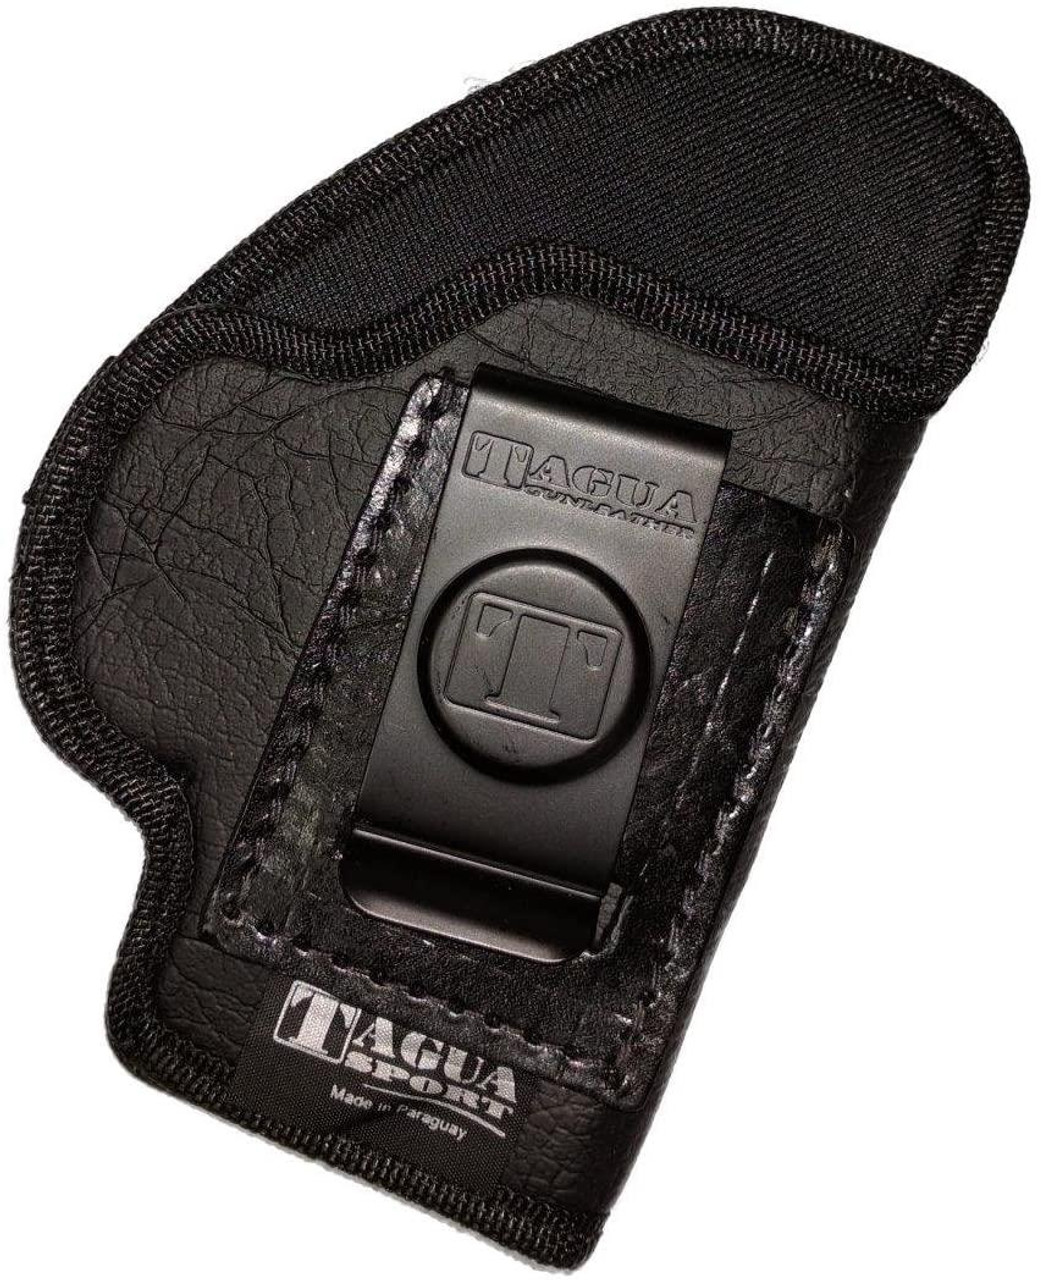 Tagua The Weightless Holster Most Small 380's,Bodyguard,LCP,Right Hand, Black